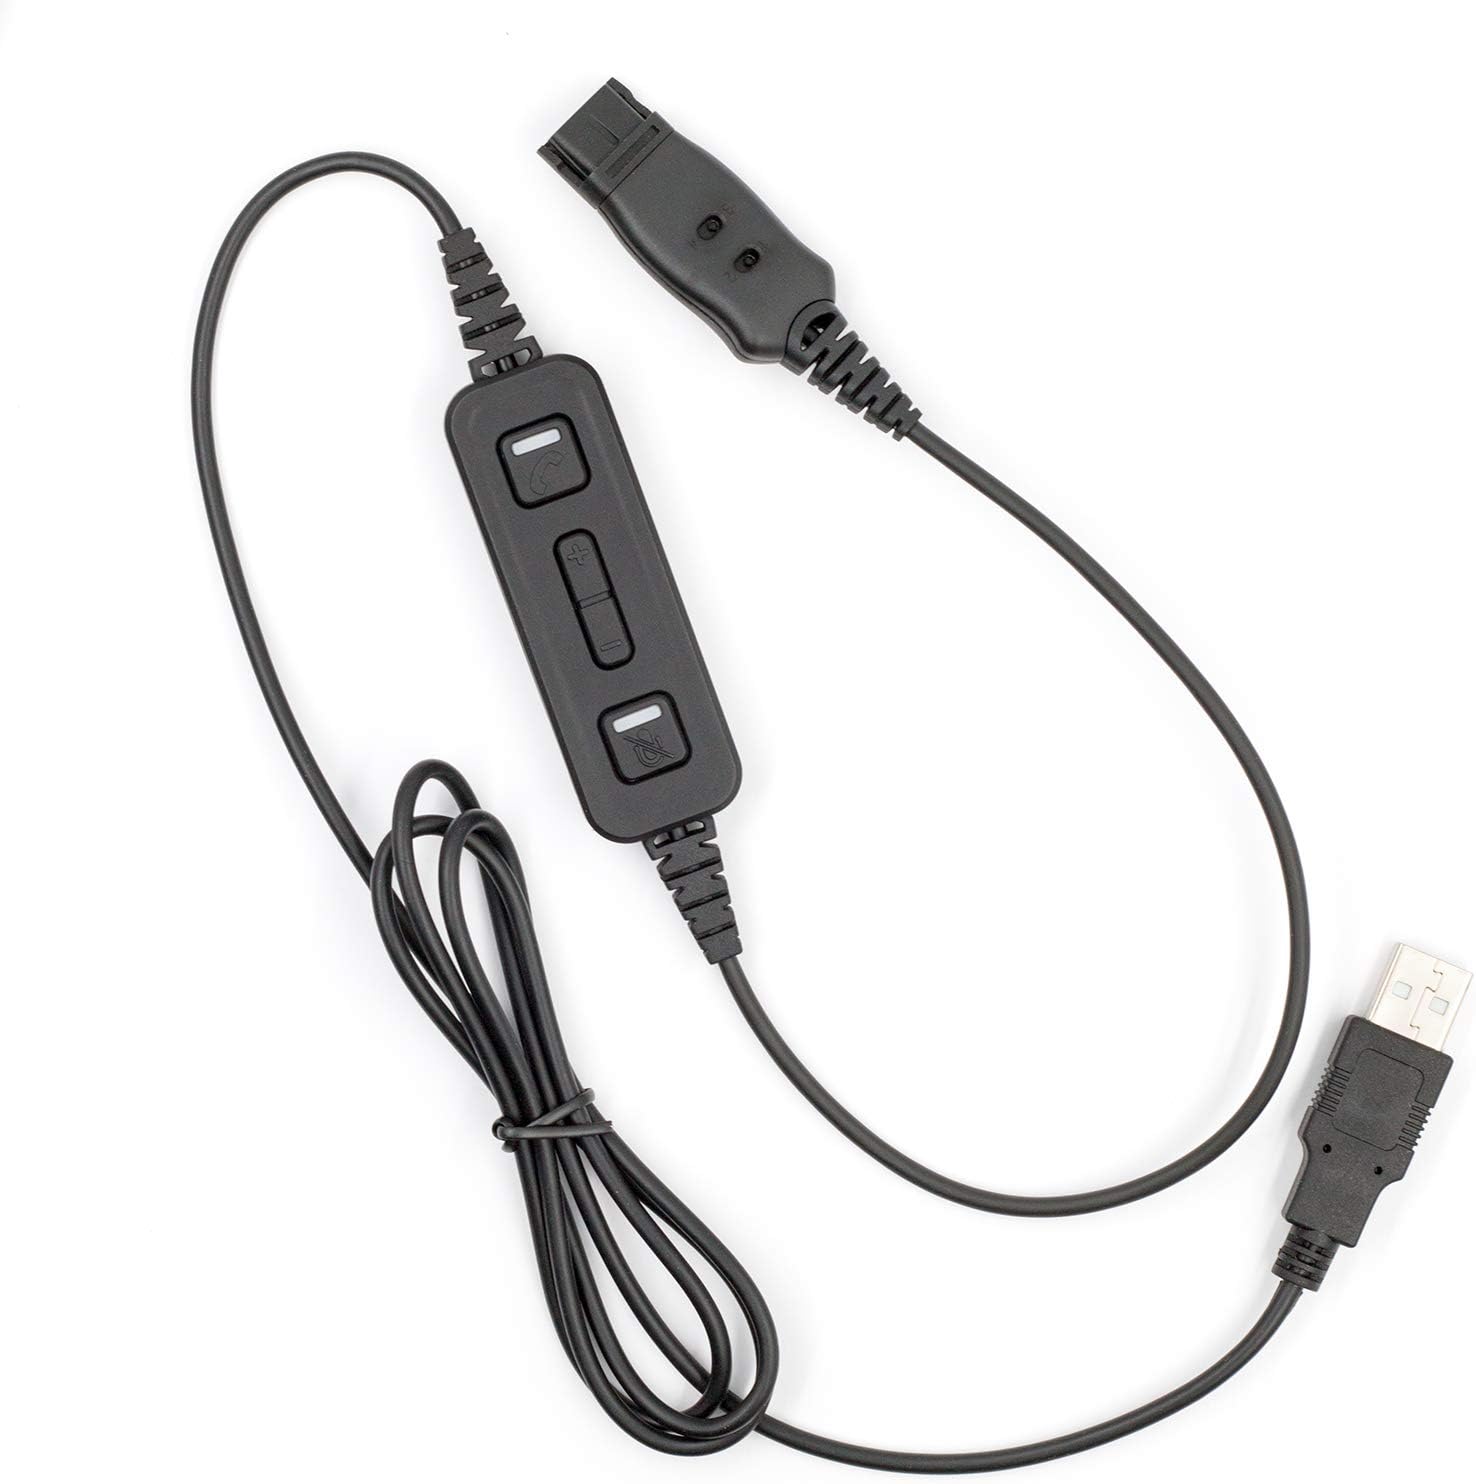 Leitner USB Quick Disconnect Cord